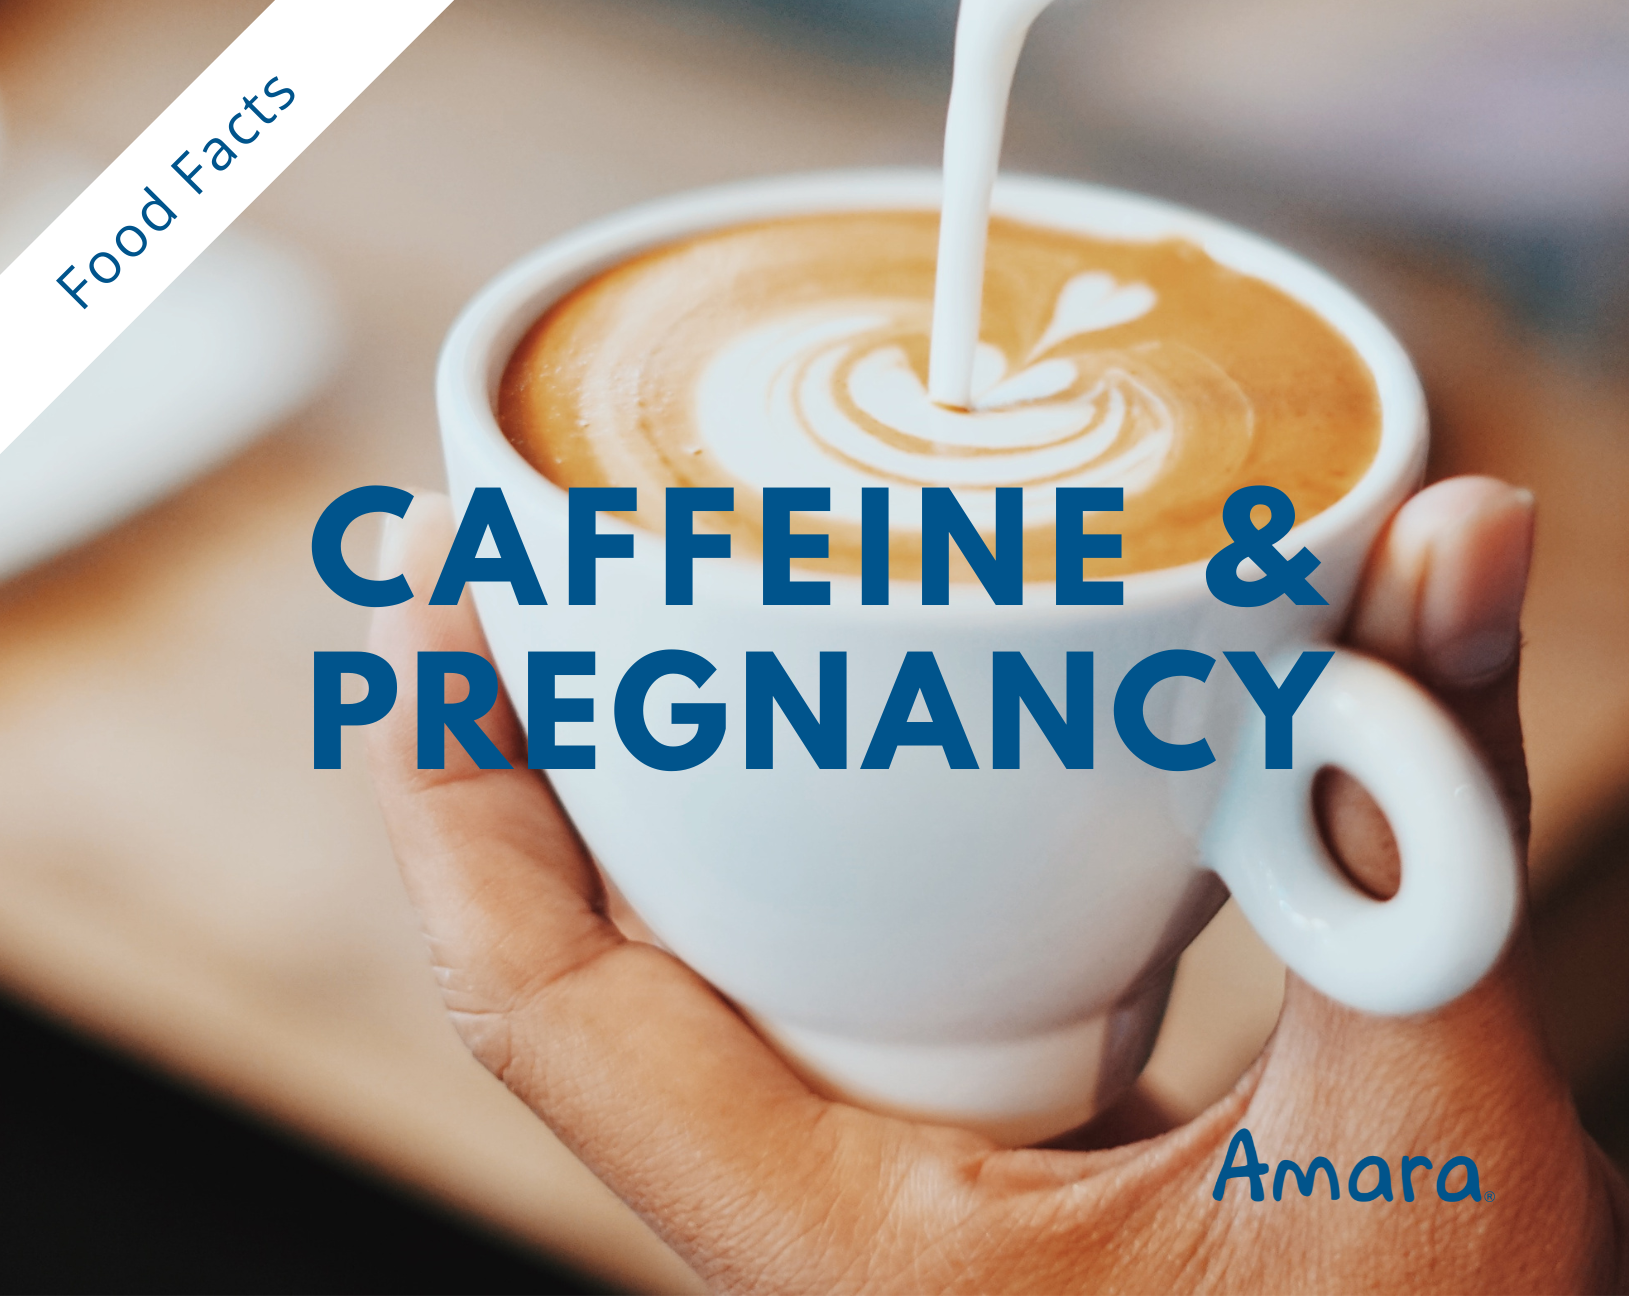 everything you need to know about caffeine and pregnancy